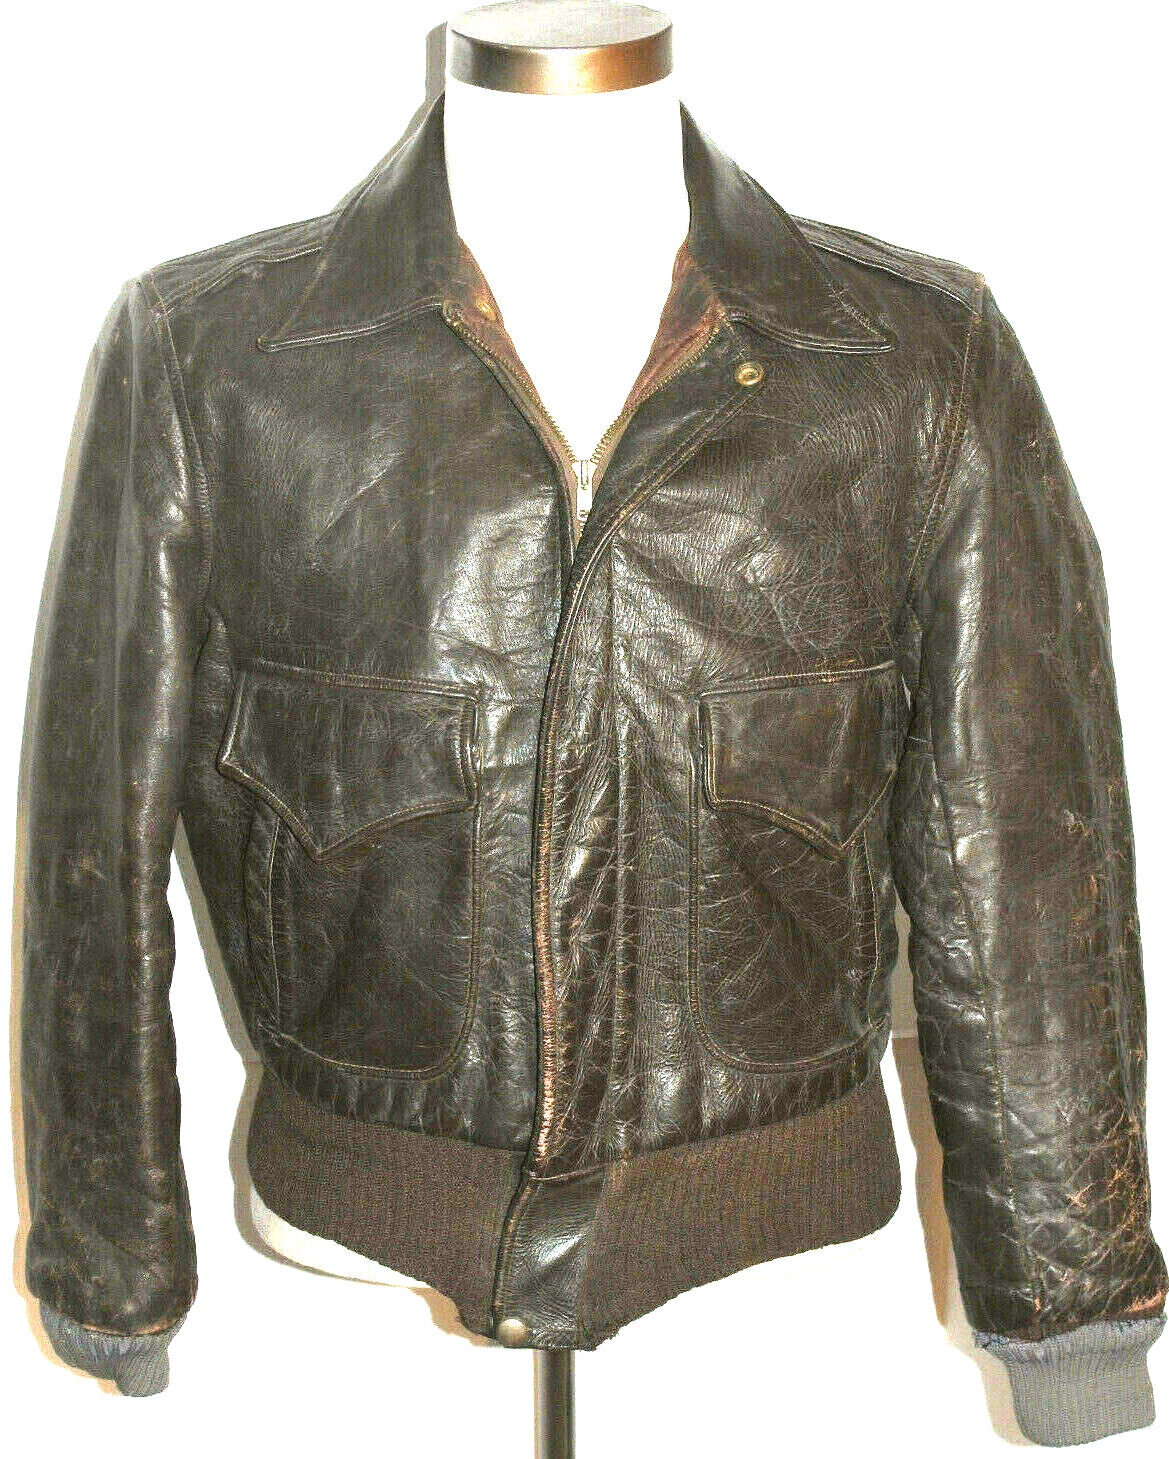 VINTAGE 1940s RICHMAN BROS. BOMBER HORSEHIDE LEATHER A-2 JACKET/QUILTED LINING S